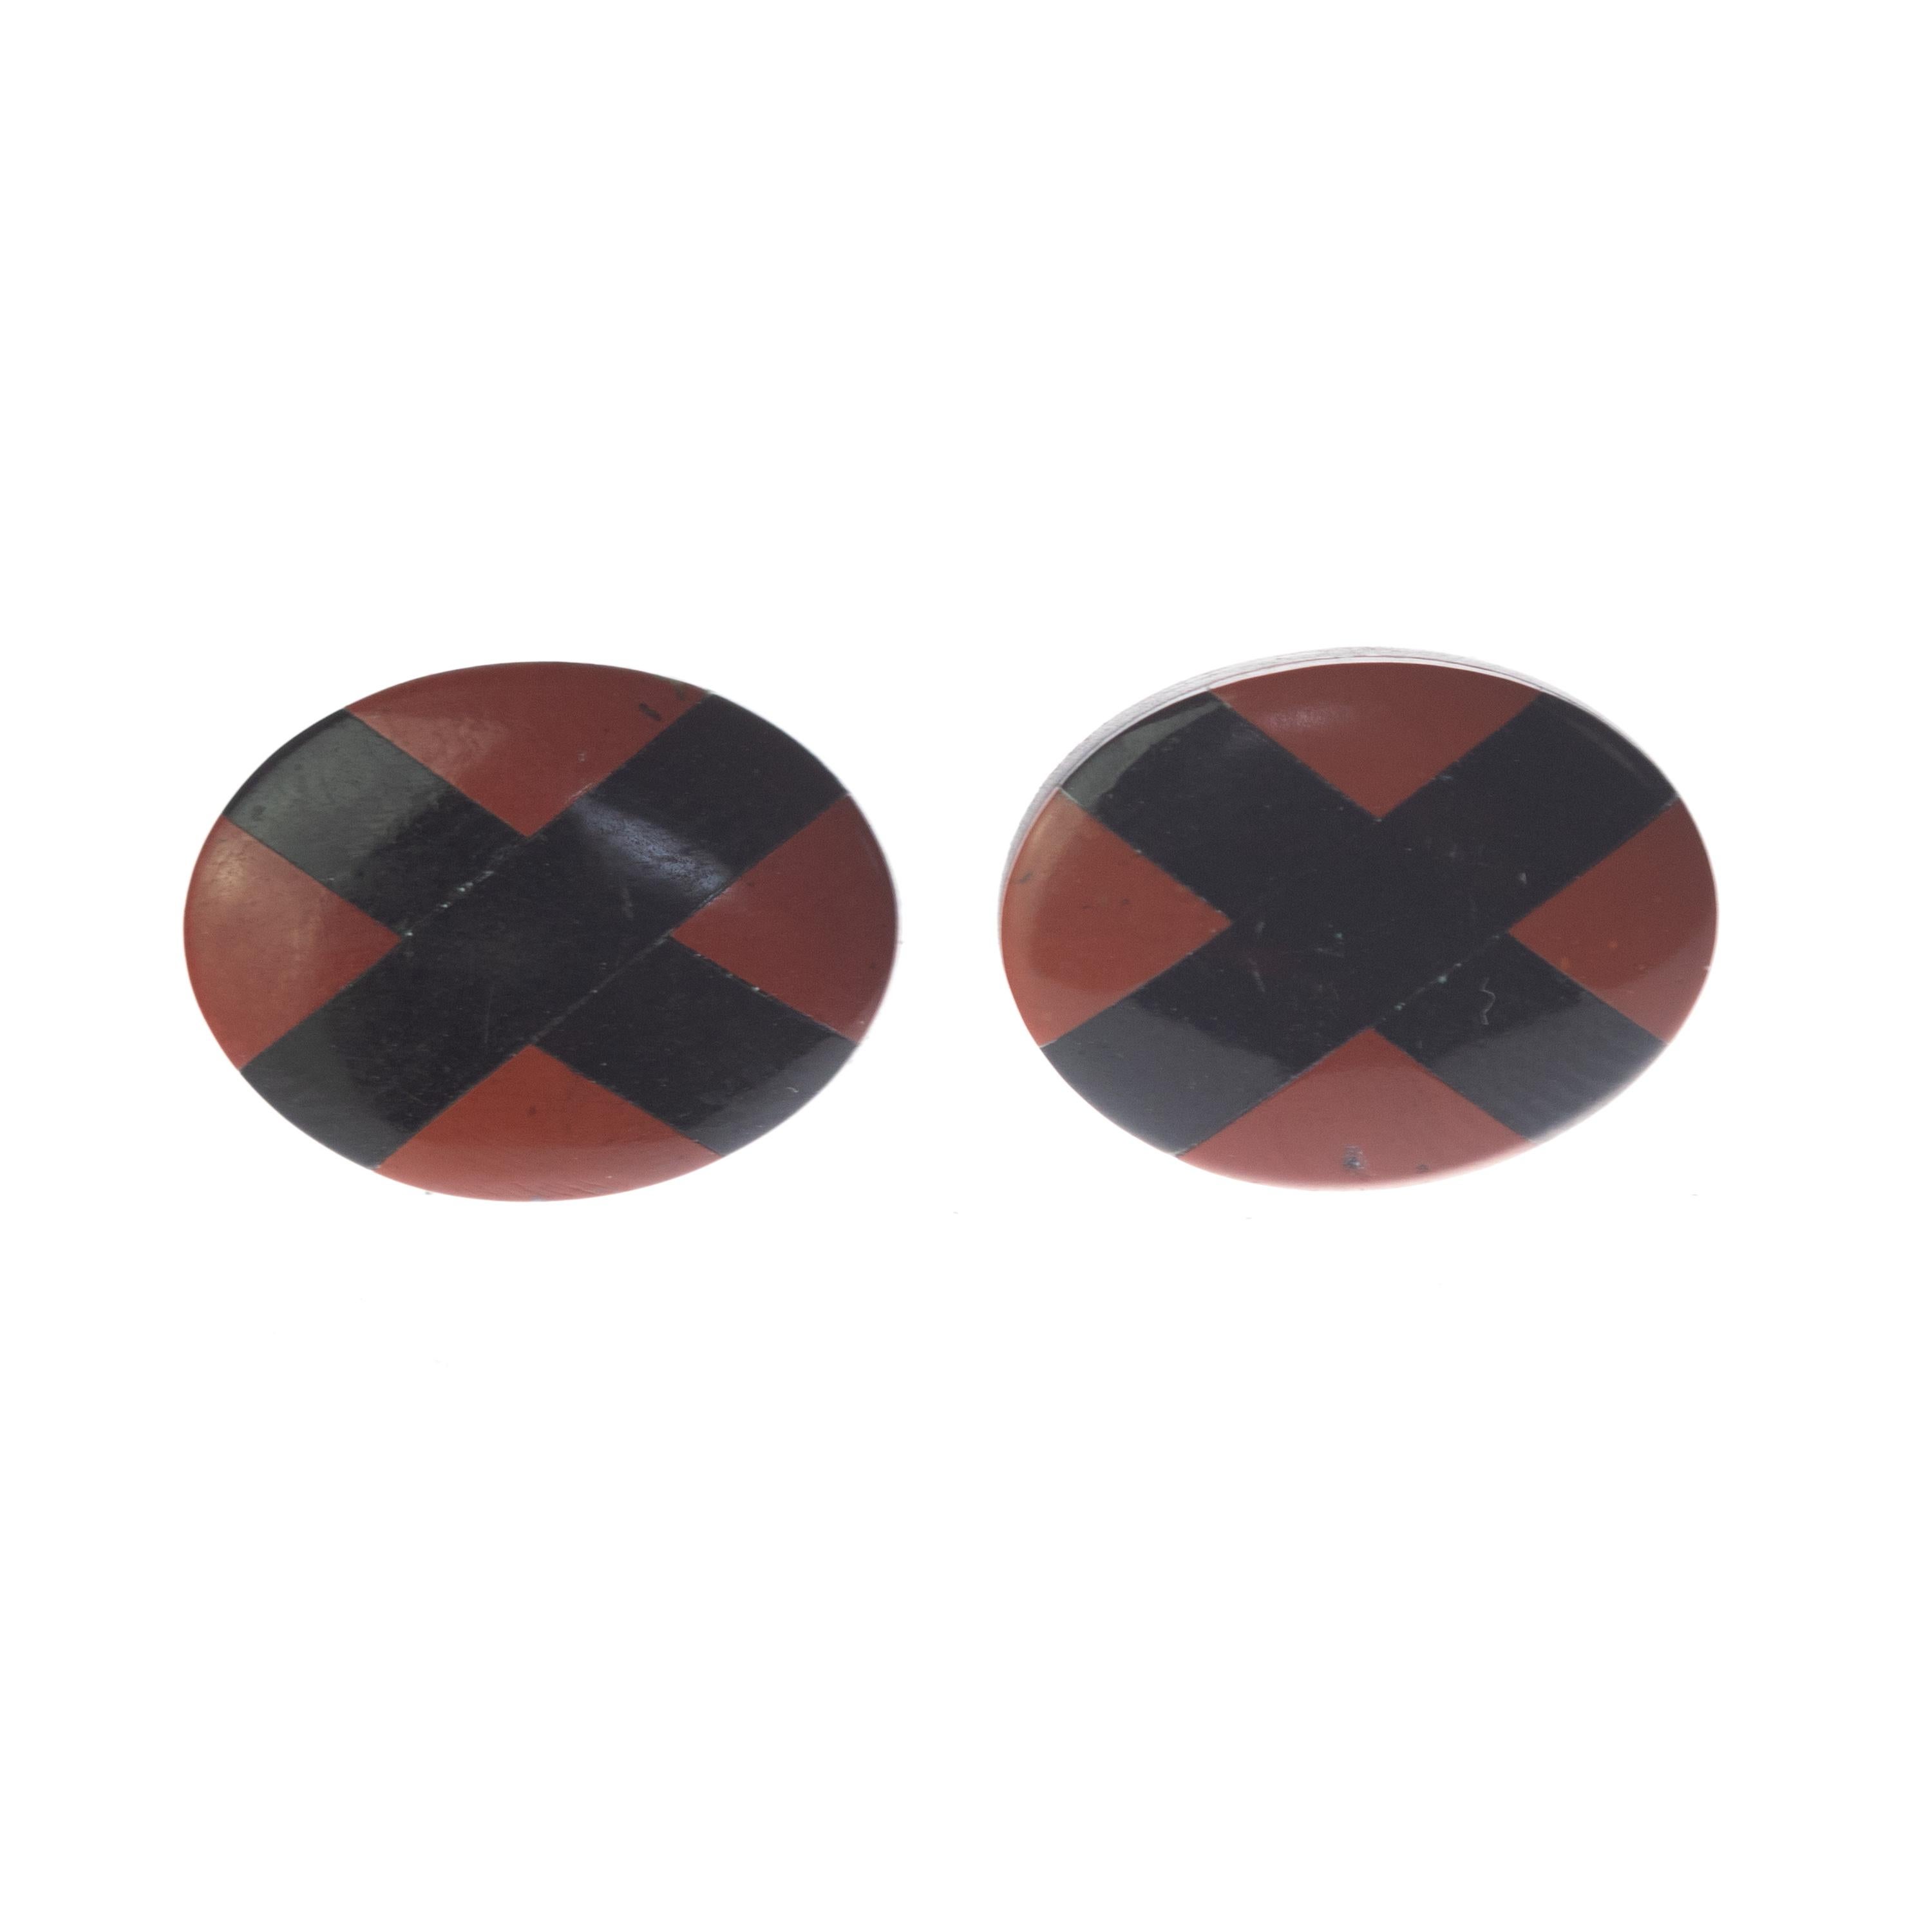 Astonishing and gorgeous red oval jasper stud earrings. Carved and colored with a black cross which evokes a traditional chess board the italian handmade jewelry work.

Jasper is a stress relieving stone; relaxing, soothing and calming to the